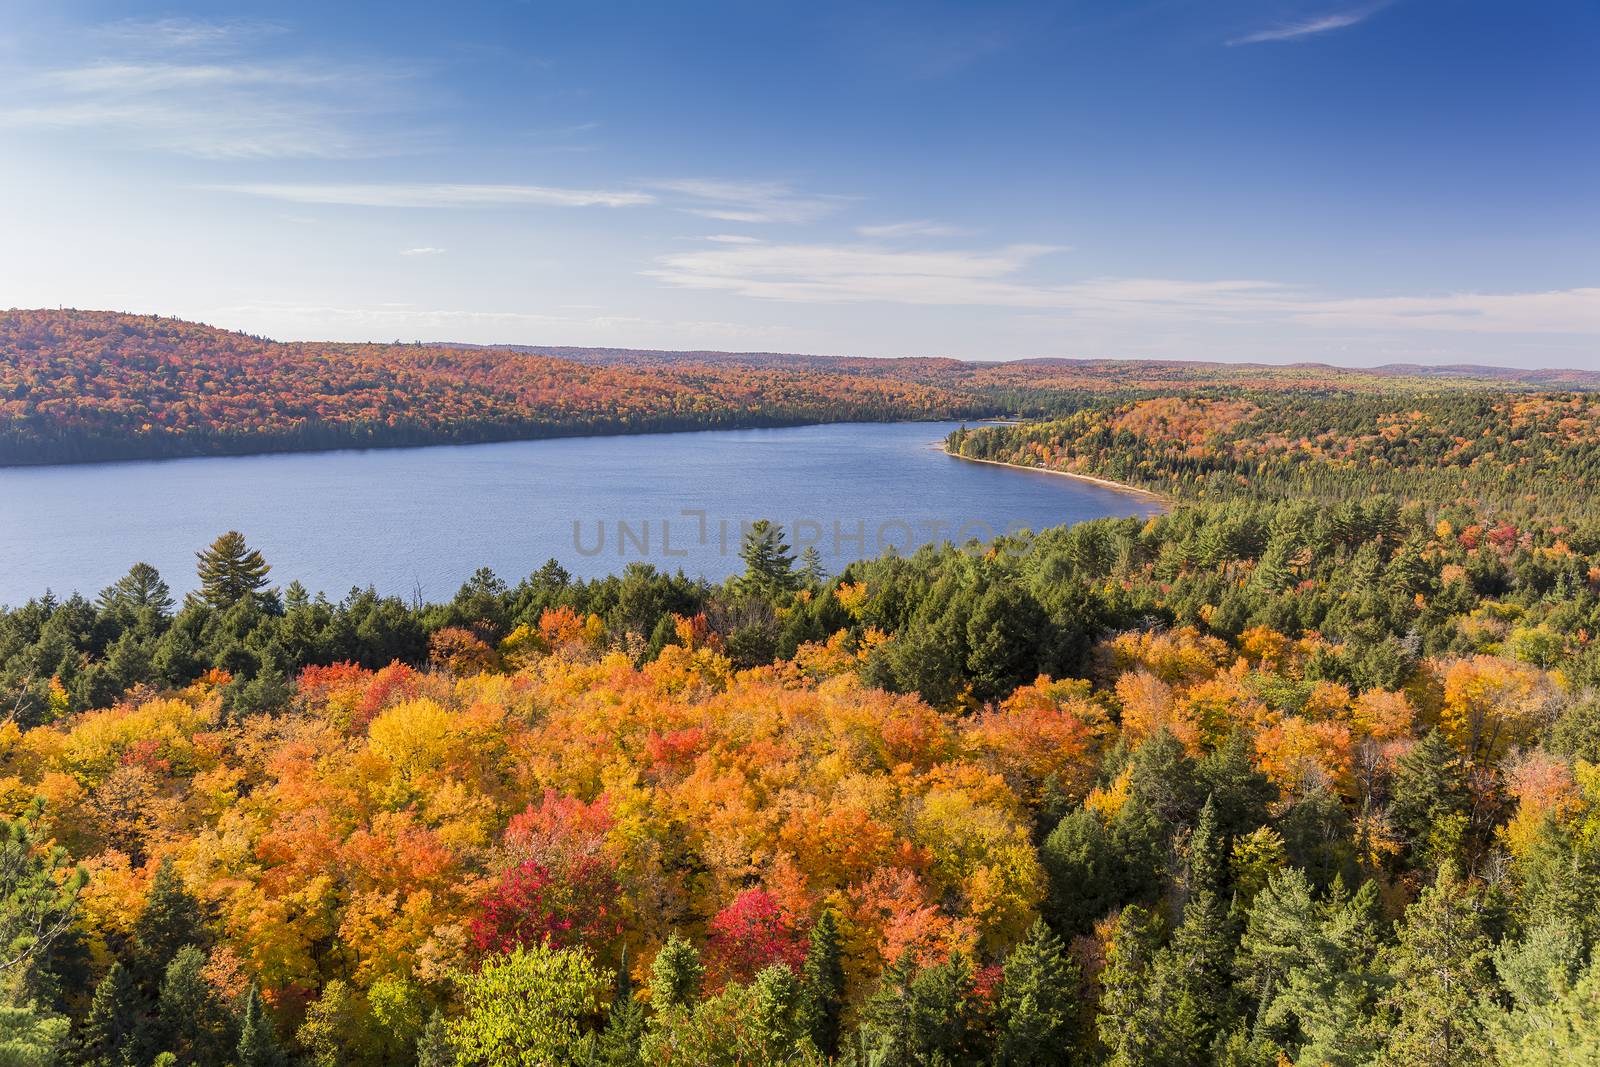 Elevated View of Lake and Fall Foliage - Ontario, Canada by gonepaddling